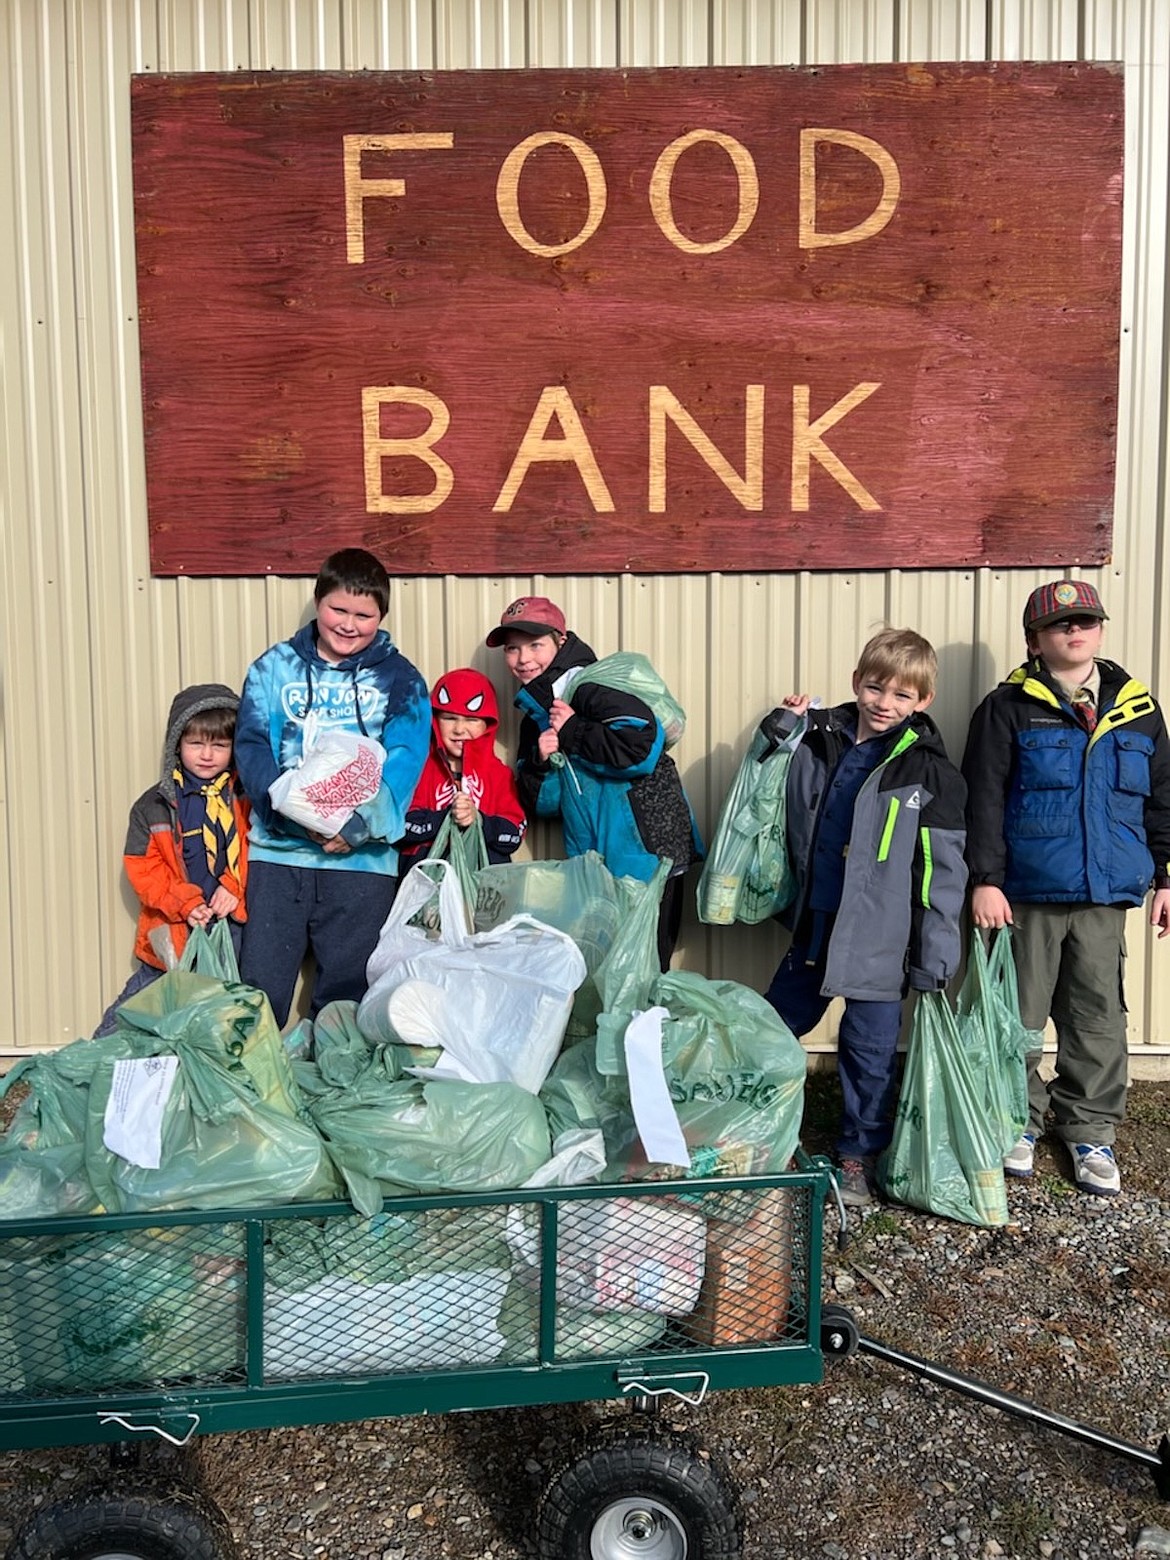 The Cub Scouts of Pack 4925 in Libby and Troy collected nearly a ton of food for local food pantries on Nov. 12, 2022. The Libby Cub Scouts gathered 1,217 pounds of food for Libby Food Pantry. Troy Scouts gathered food for Troy Baptist Food Pantry, but they didn’t have a scale to get a weight. Both packs are thankful to the residents of Libby and Troy for their donations.